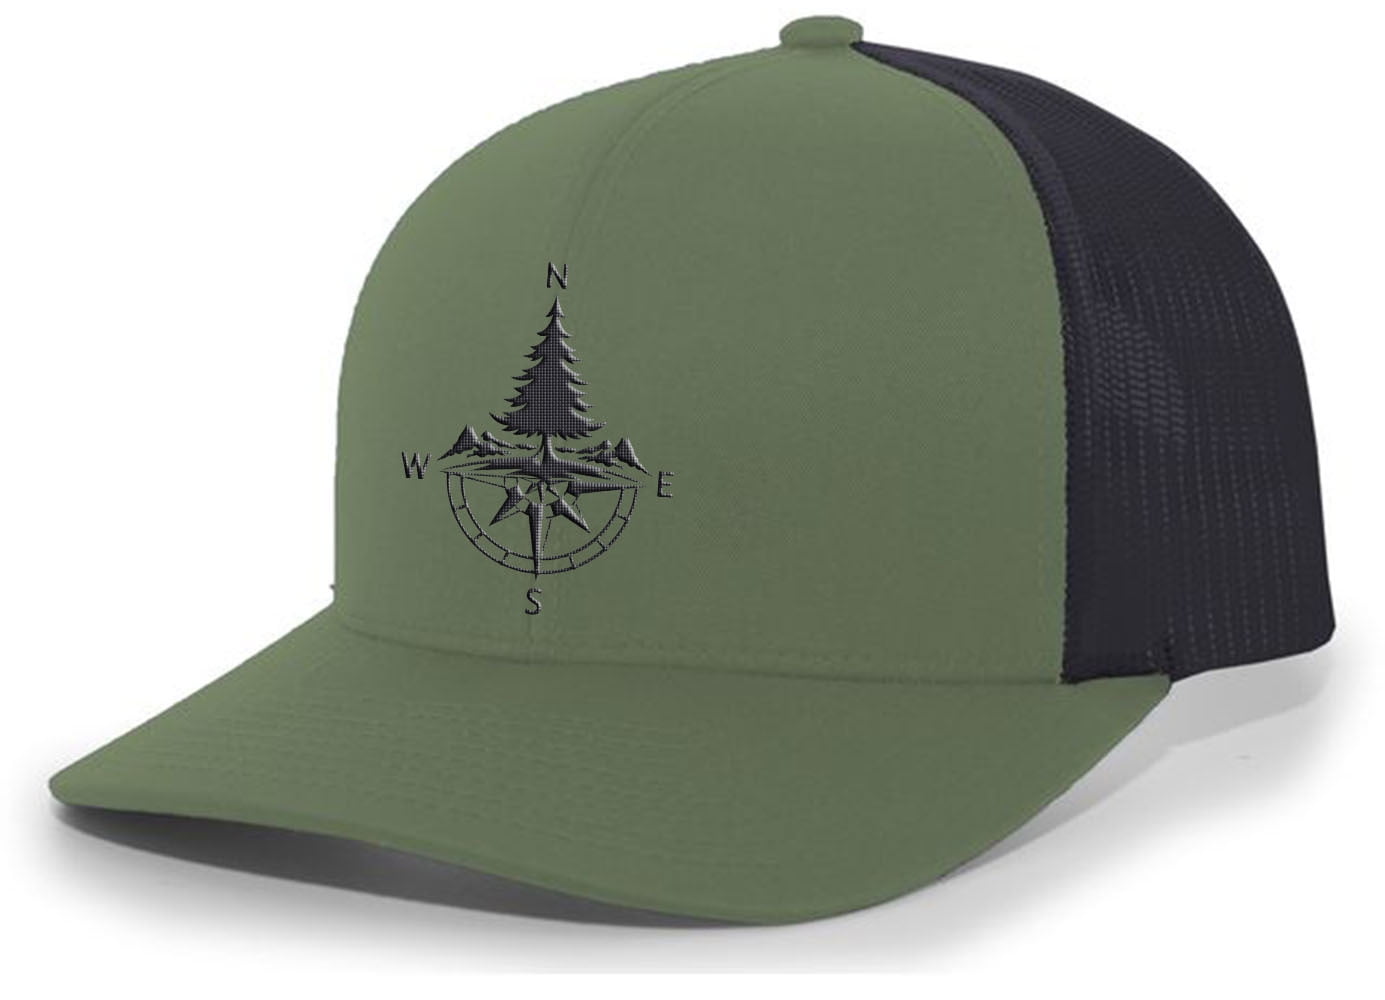 Heritage Pride Compass and Pine Tree Nature Mens Embroidered Mesh Back  Trucker Hat Baseball Cap, Loden/Black 